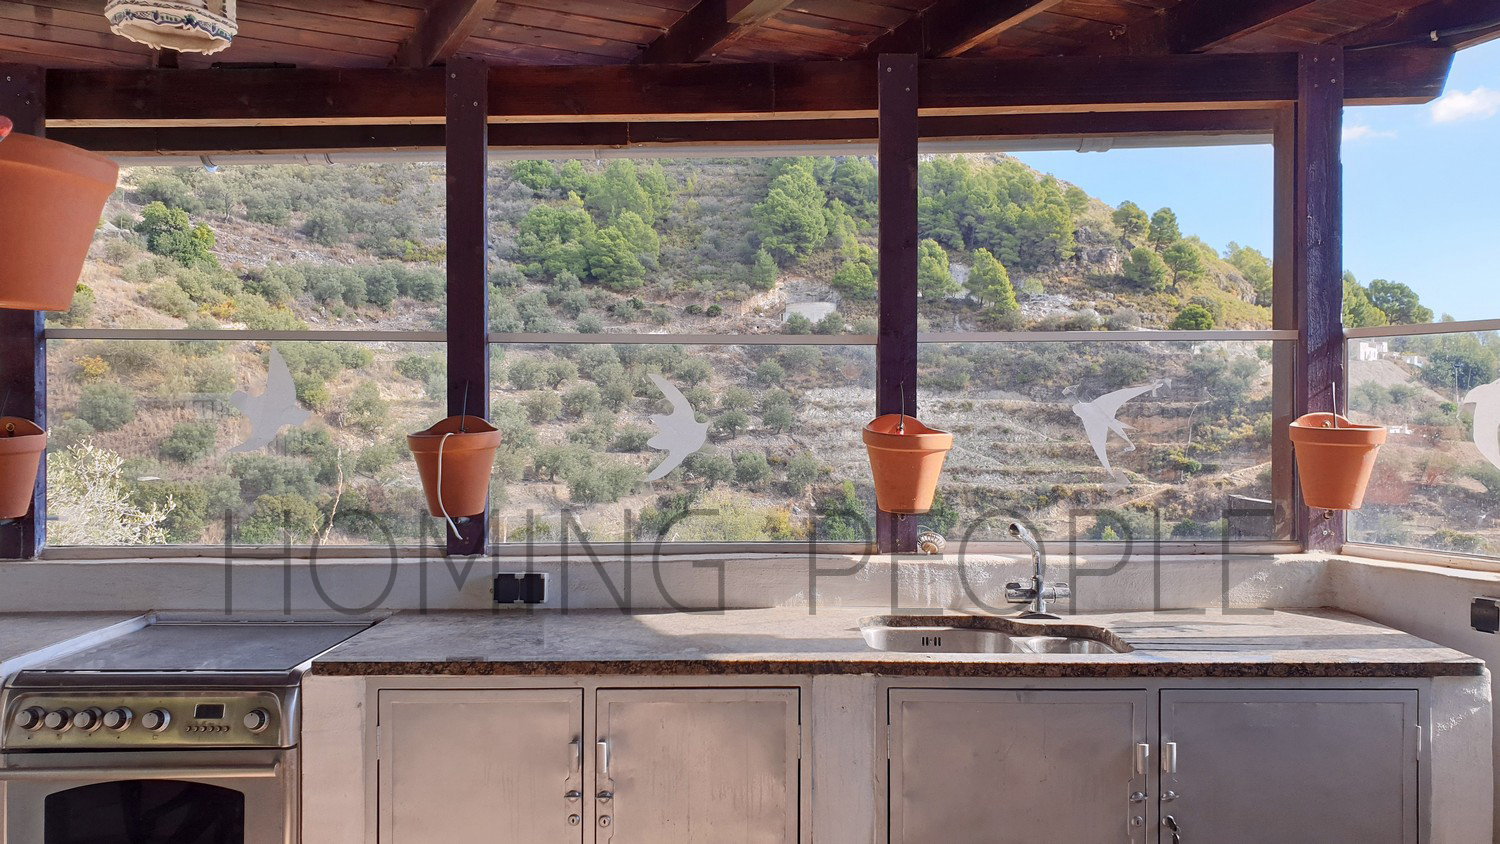 RENTED OUT! A charming cortijo with panoramic, mountain views